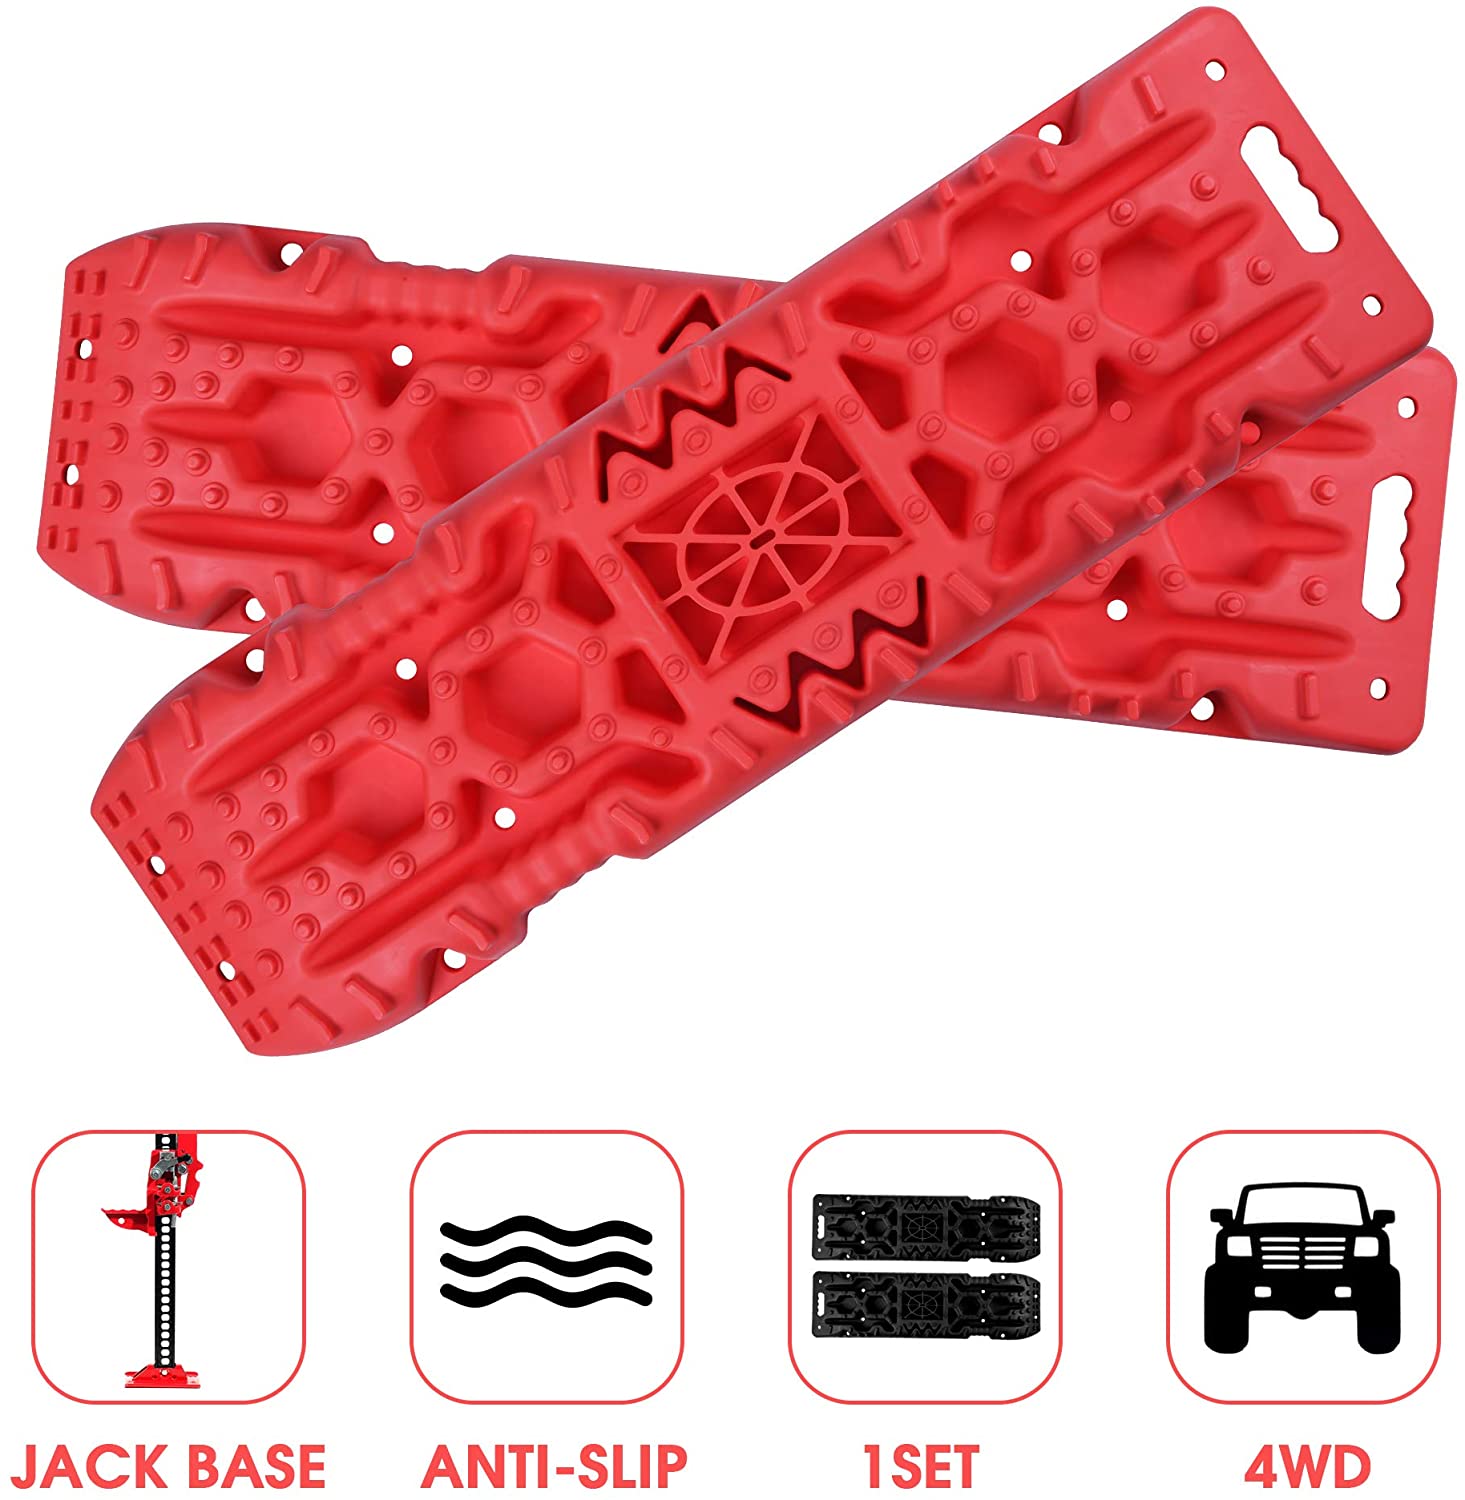 2 Pack Traction Boards with Jack Lift Base,Recovery Track Traction Mat for 4WD SUV, Jeep Tire Traction Tool Suitable for Mud, Sand, Snow, Ice Blue,Red